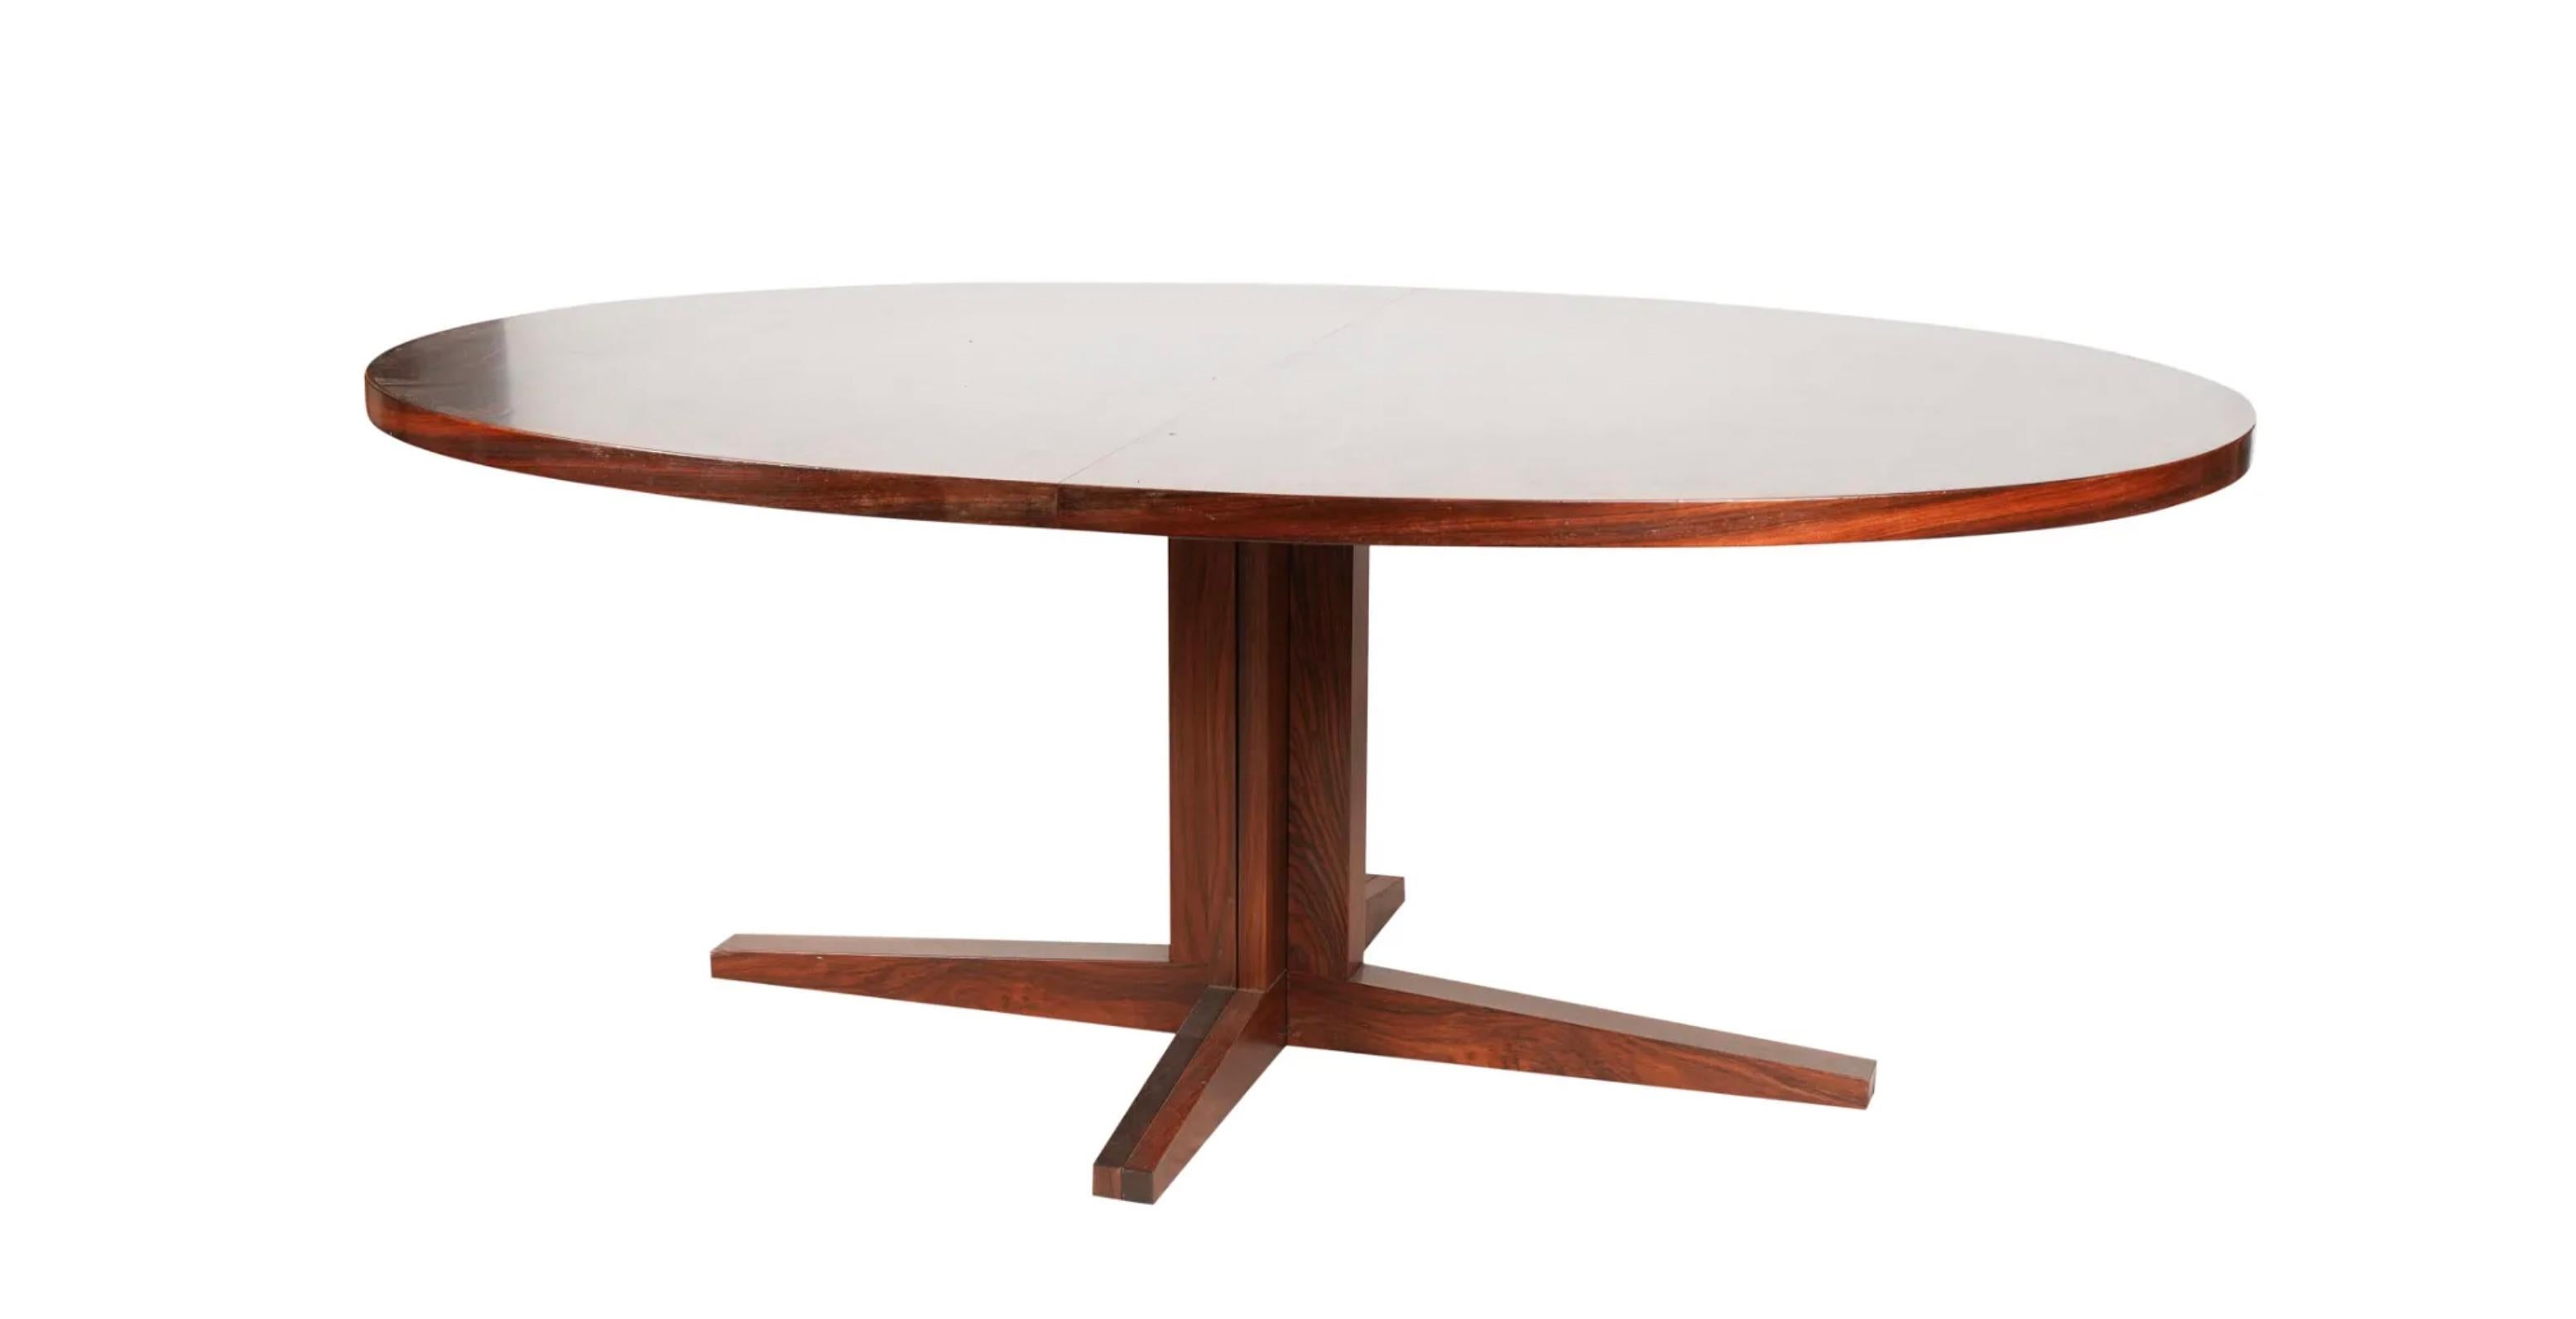 Stunning mid century rosewood oval Danish Modern extension dining table with (2) leaves. By John Mortensen for Heltborg Møbler. This table is in beautiful condition with Dark black and reddish rosewood tones very great modern Dining Table. high